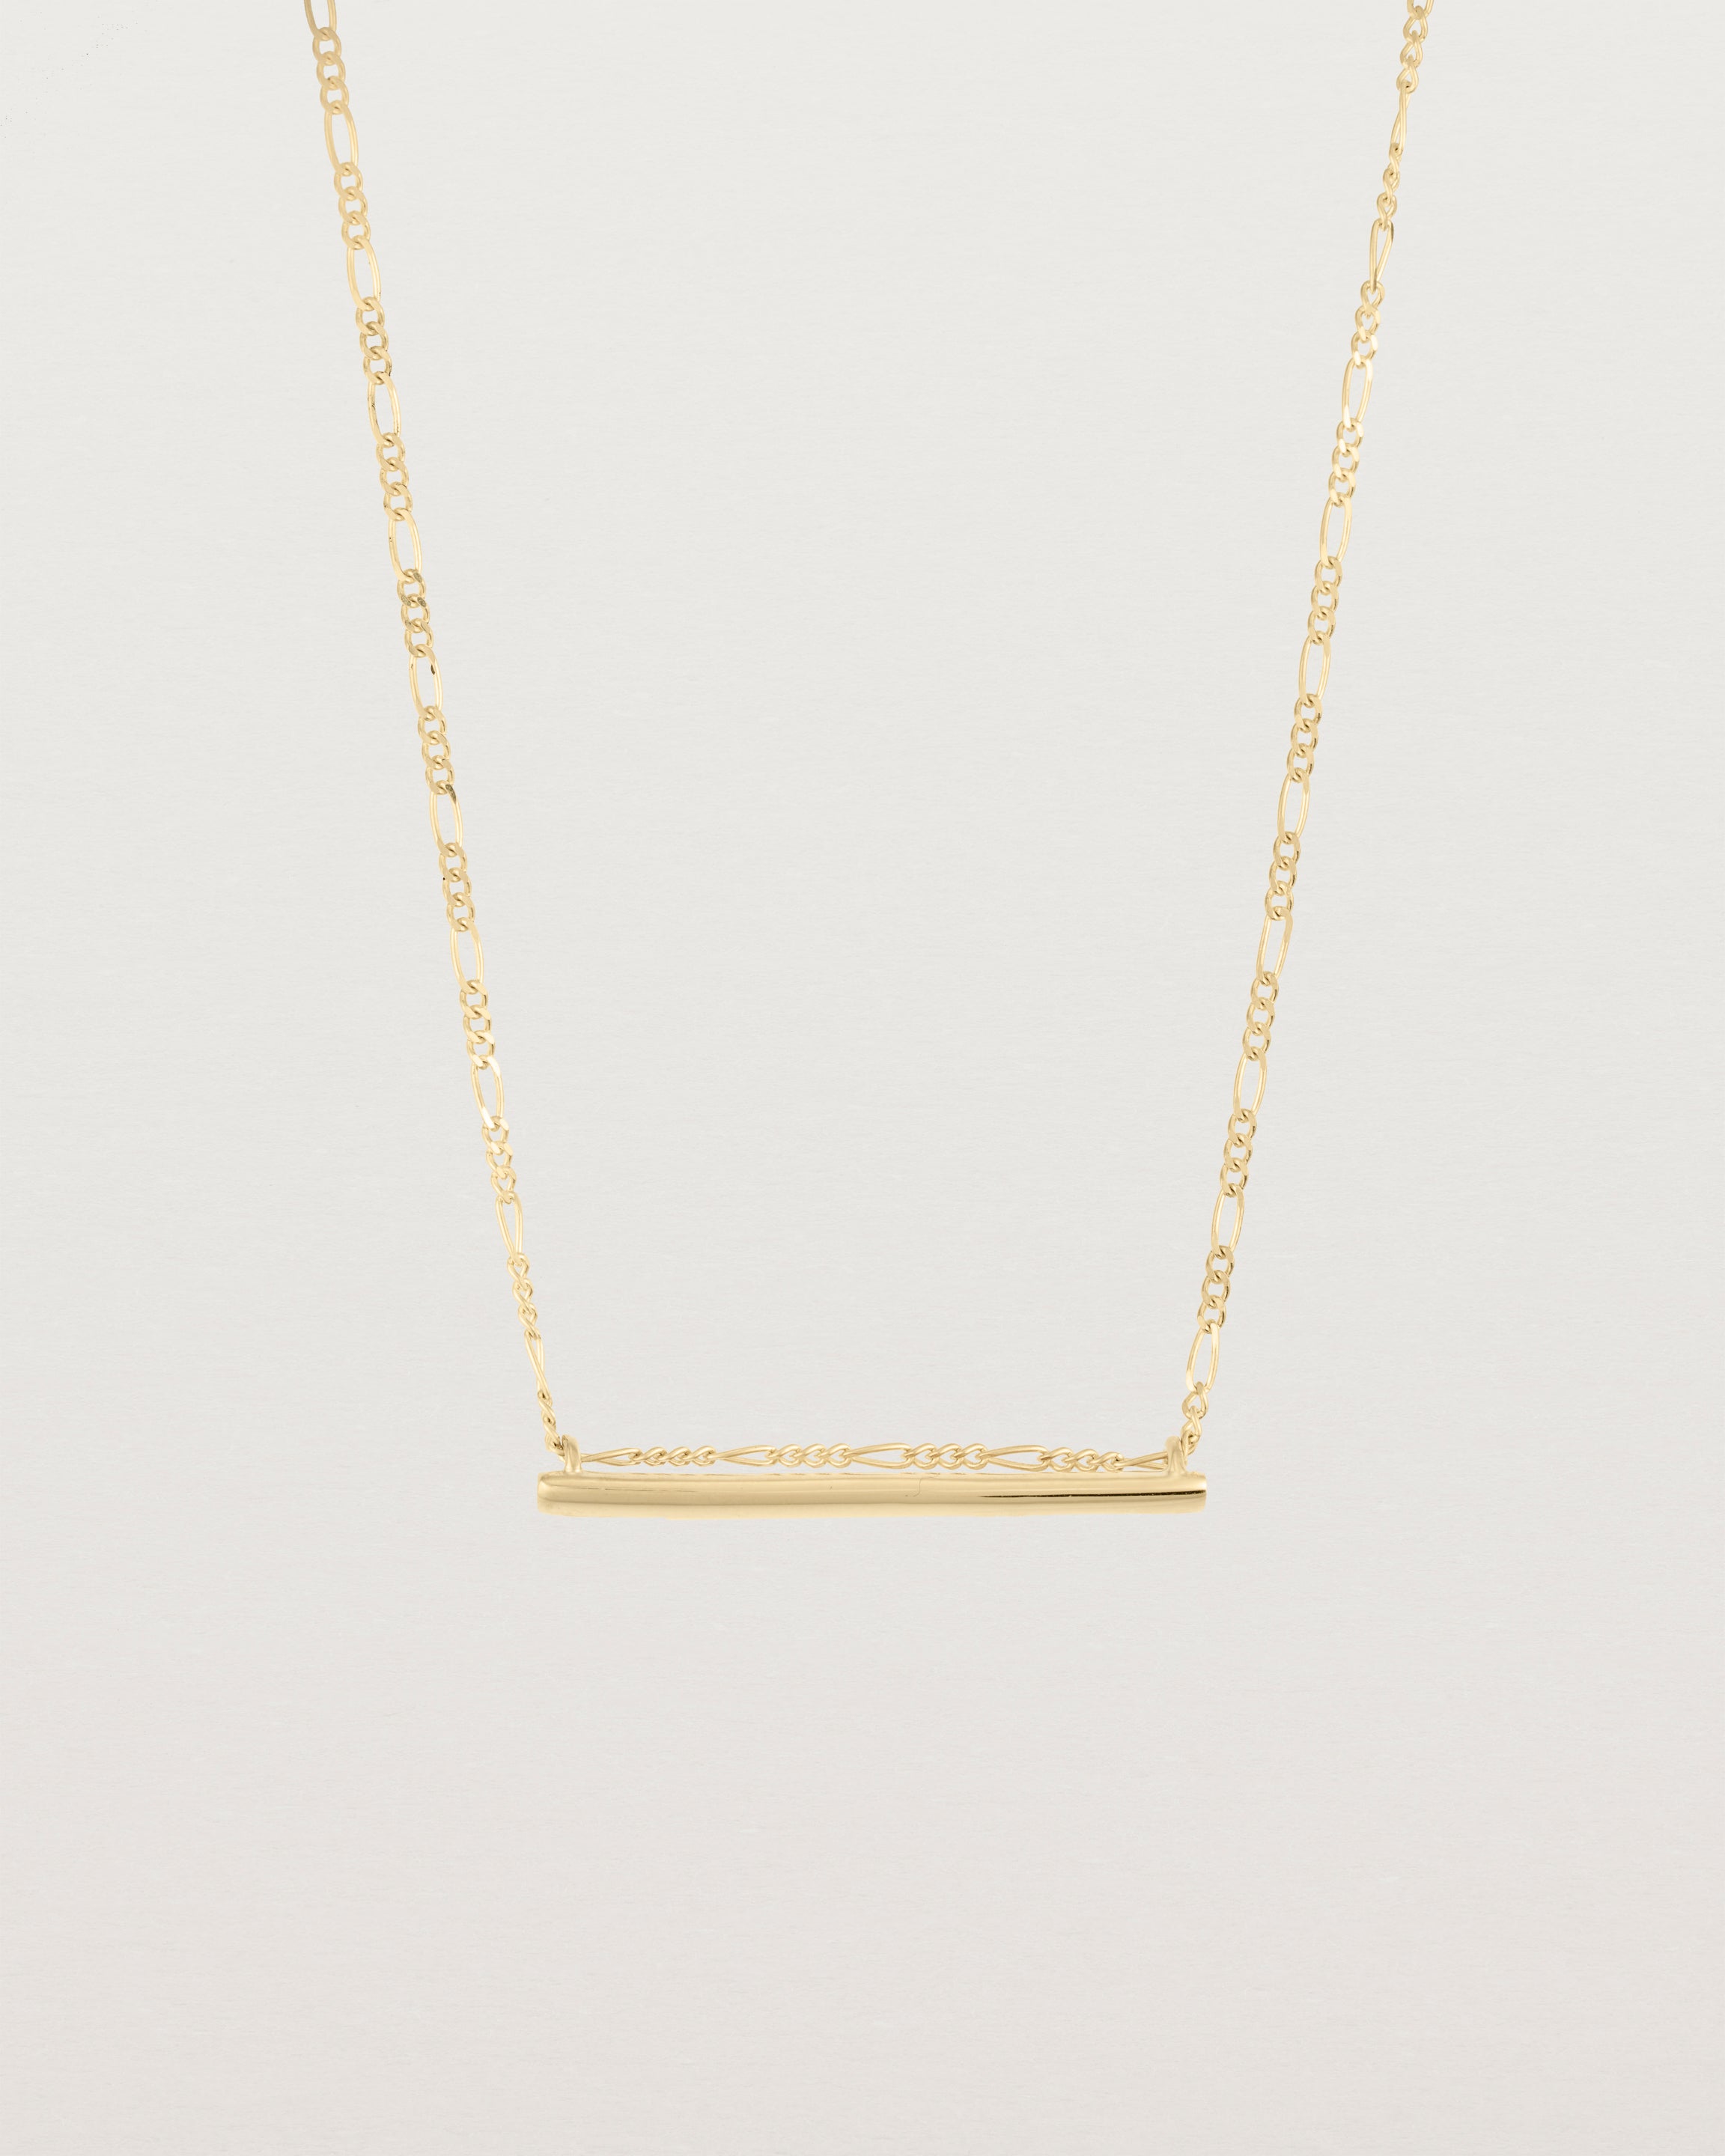 Ellipse necklace with a yellow gold bar hanging from a chain in yellow gold